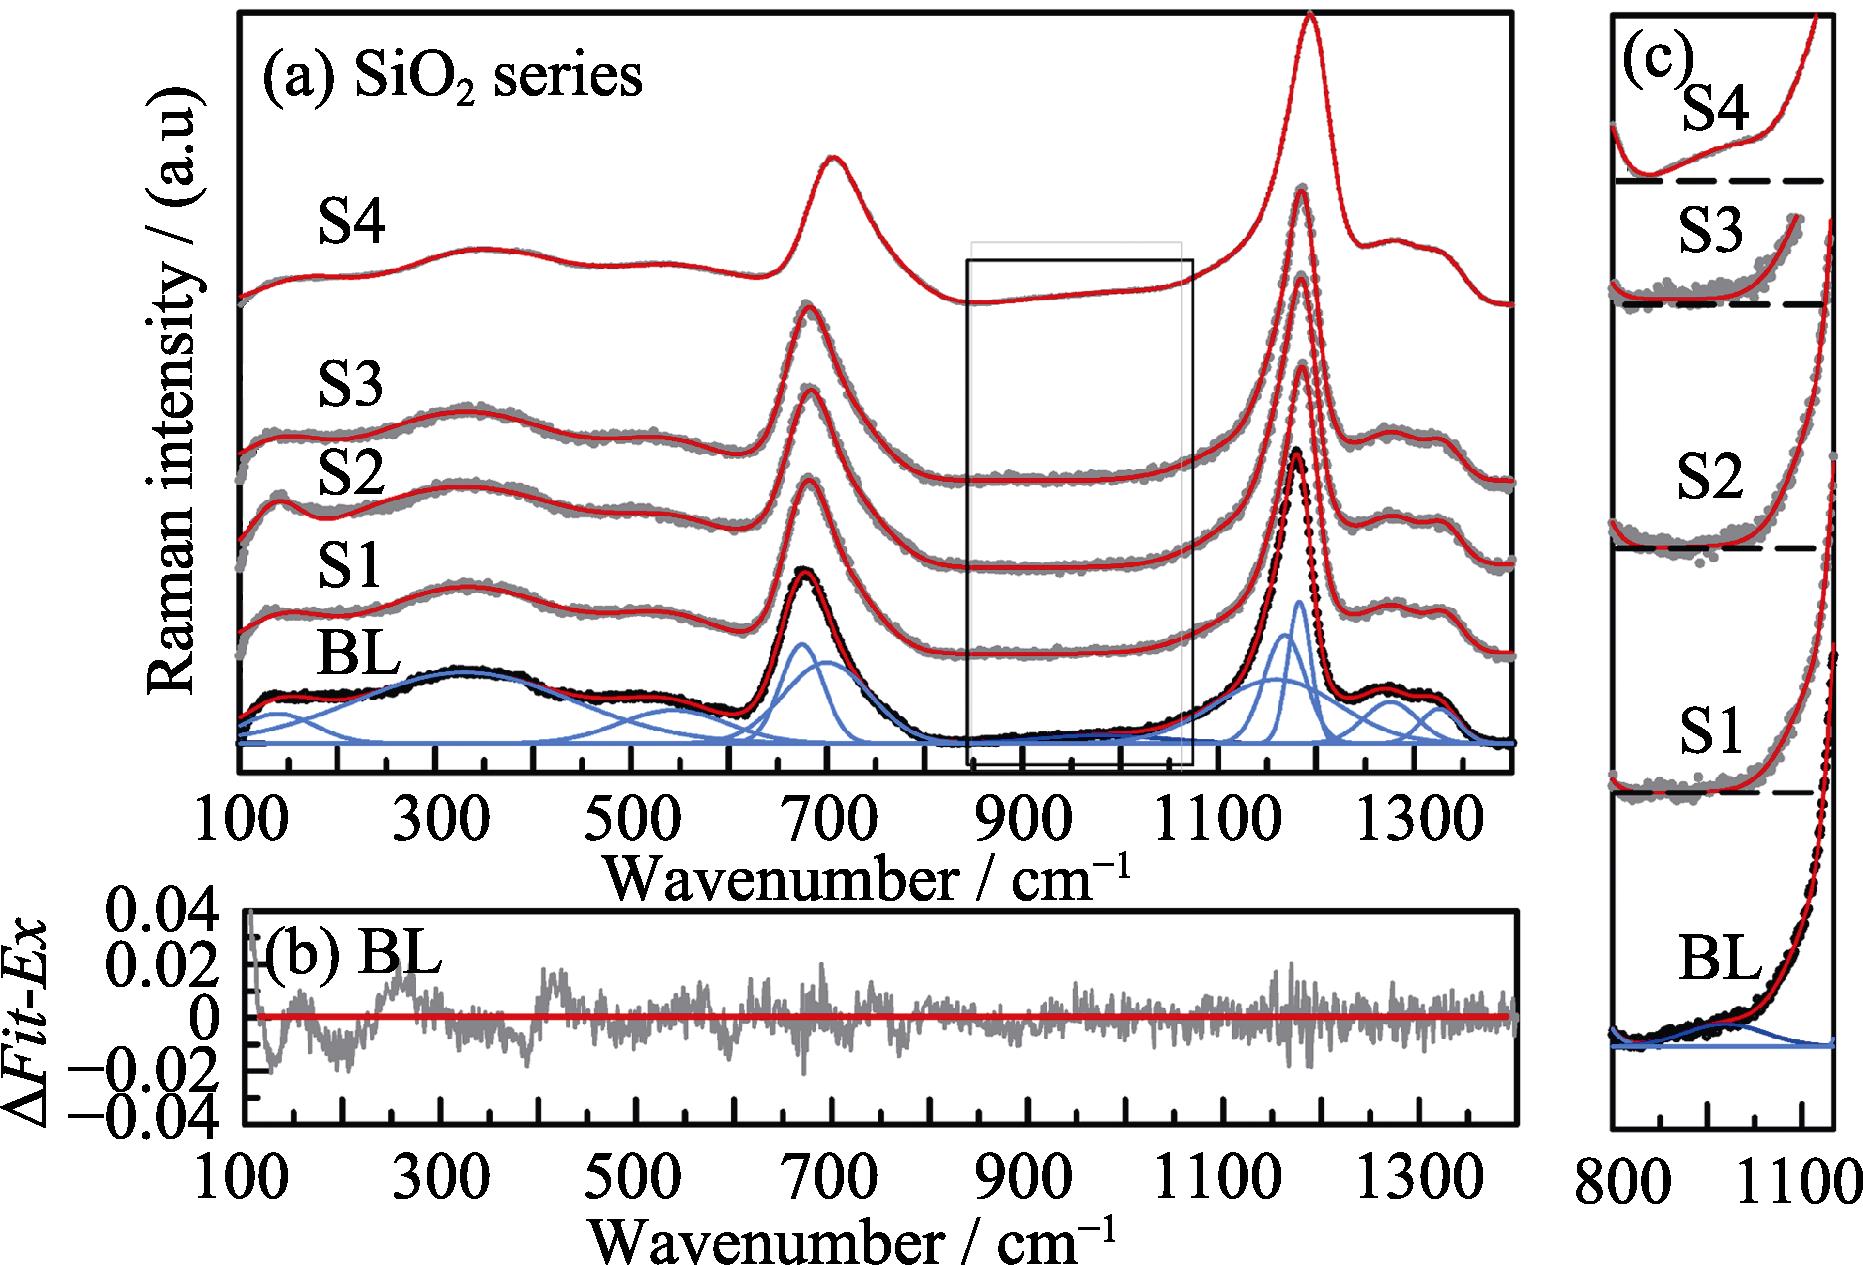 Raman spectra of BL glass and SiO2 modified glasses, comparing the measured and the simulated spectra (a) along with the corresponding error in detail curve fitting results for BL glass (b), and the fitting detail of gridlines (c) in Fig.1(a)